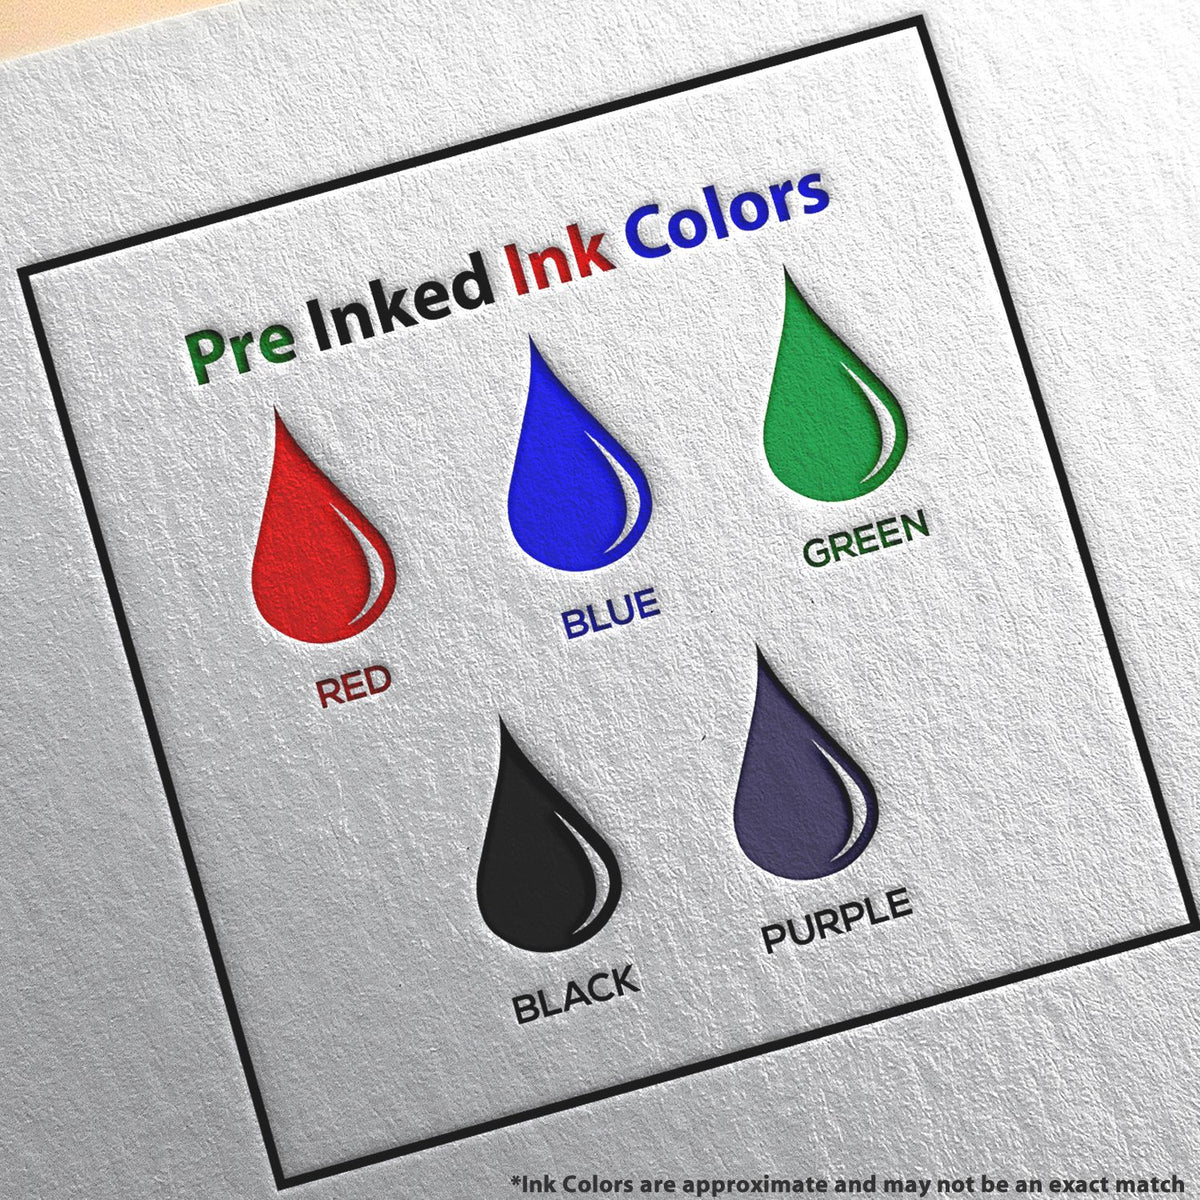 A picture showing the different ink colors or hues available for the Premium MaxLight Pre-Inked Maryland Landscape Architects Stamp product.